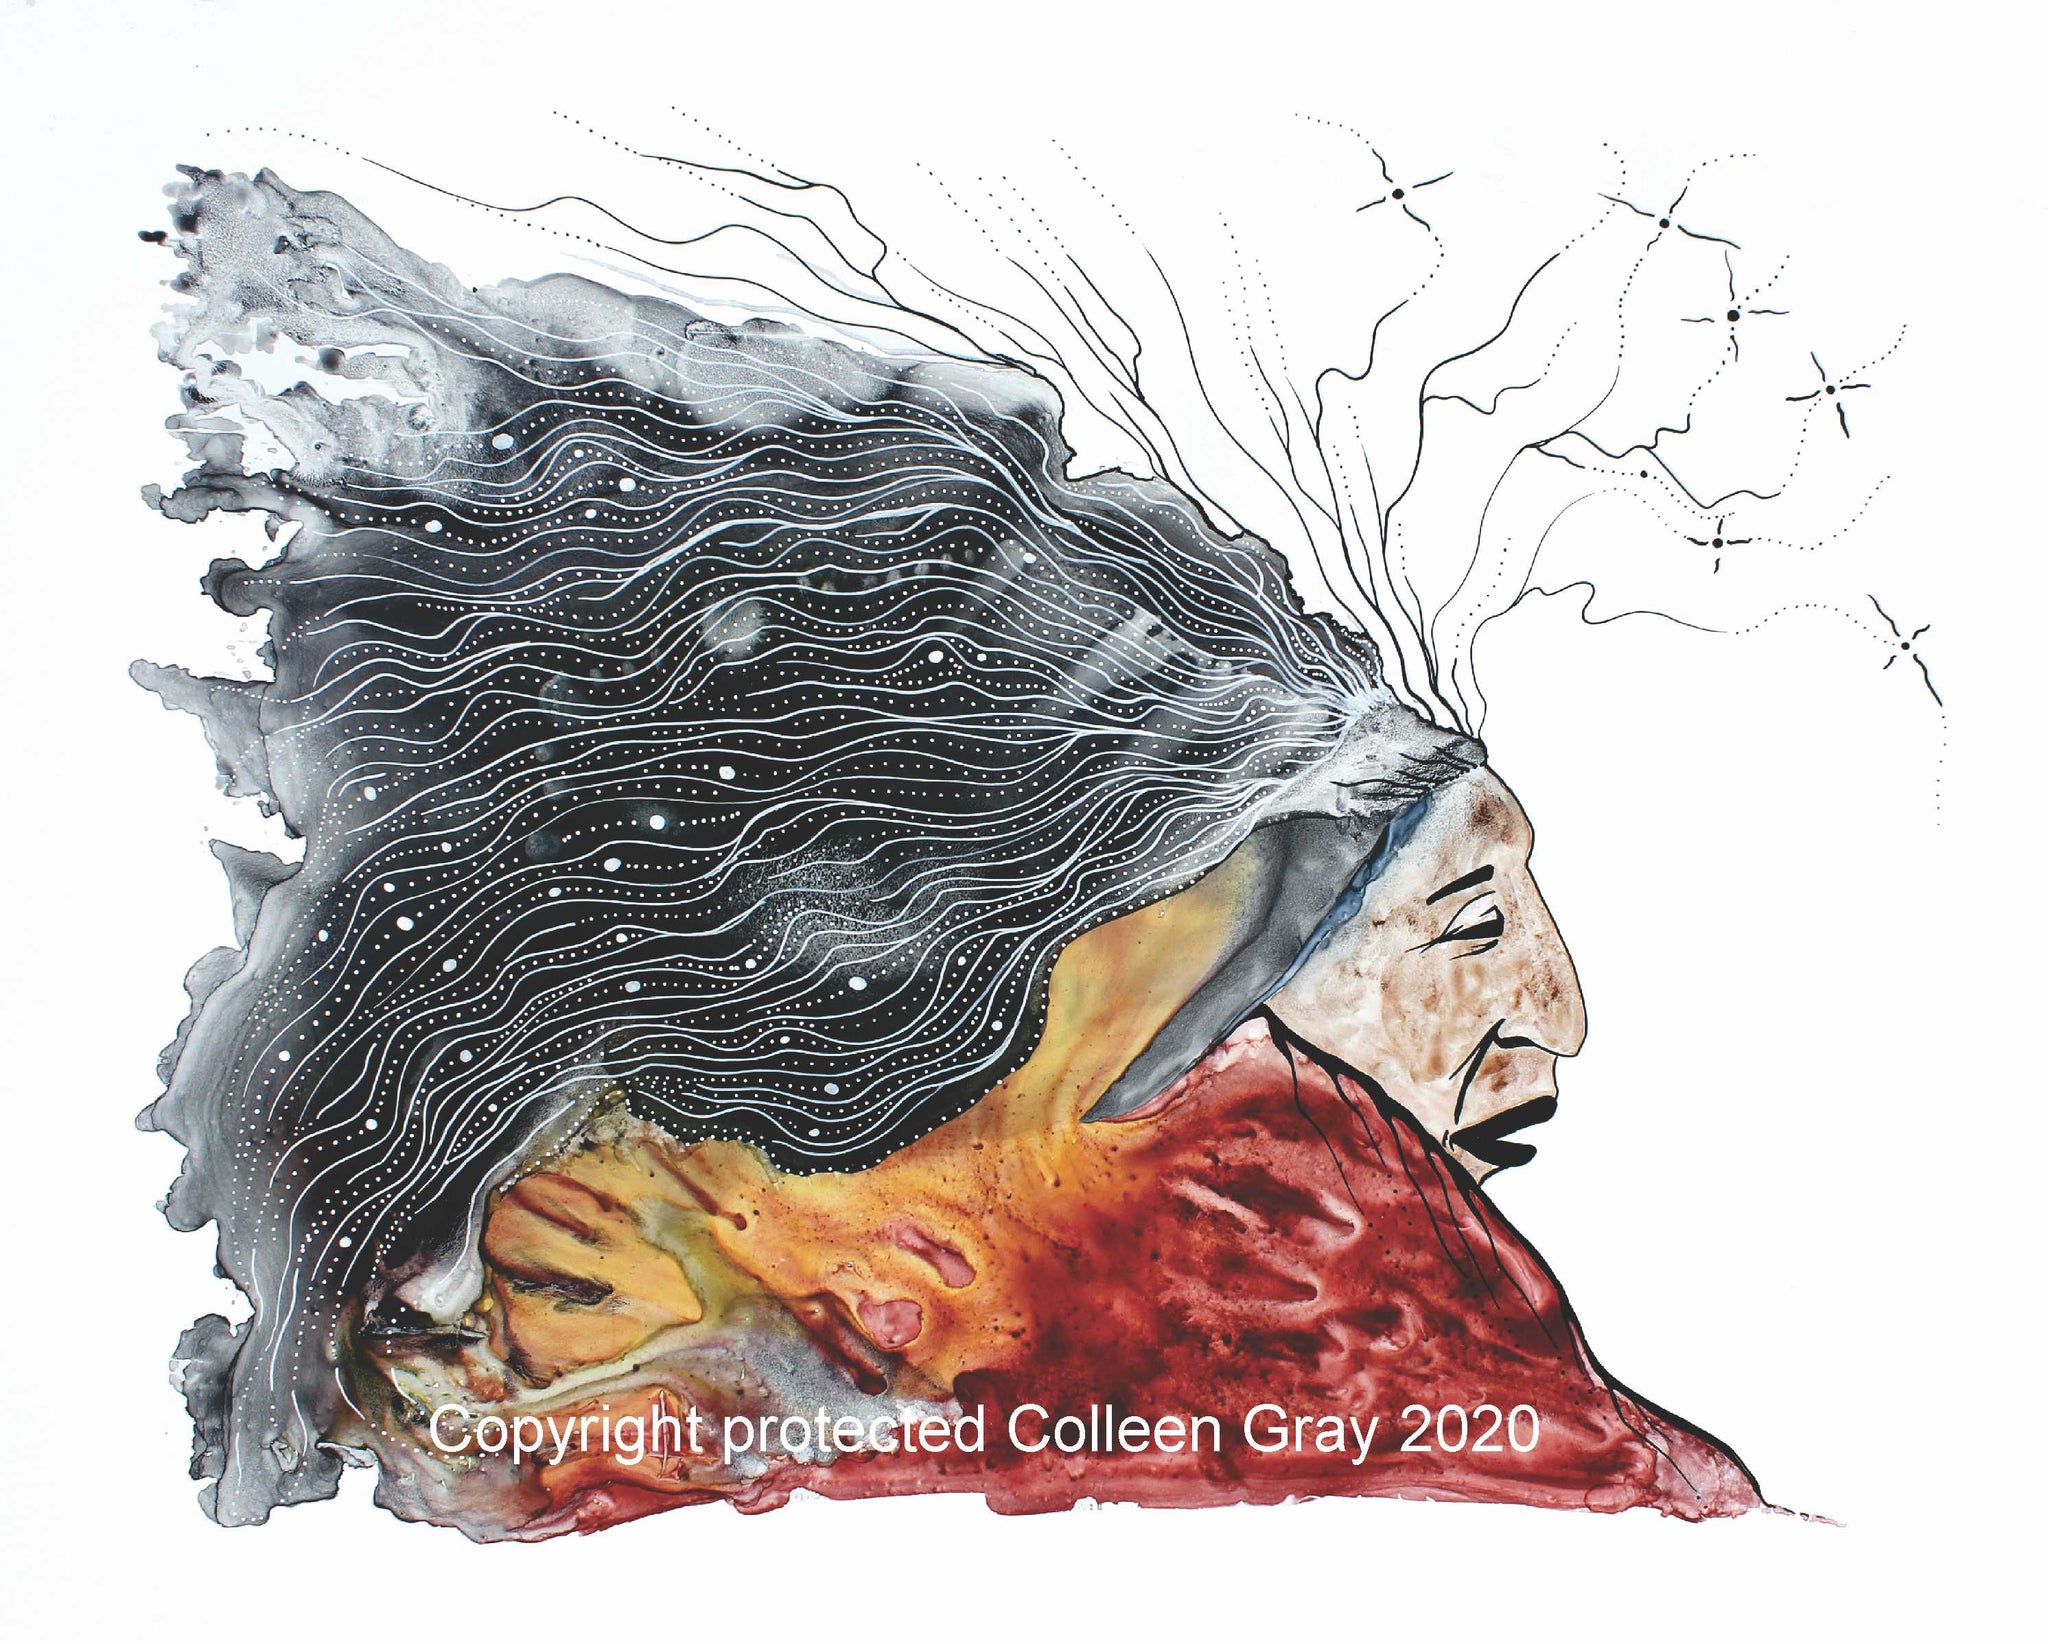 Image of Title: Old Man Dreams 16x20 archival print by Metis Artist Colleen Gray Indigenous Canadian Art Work. For sale at https://artforaidshop.ca